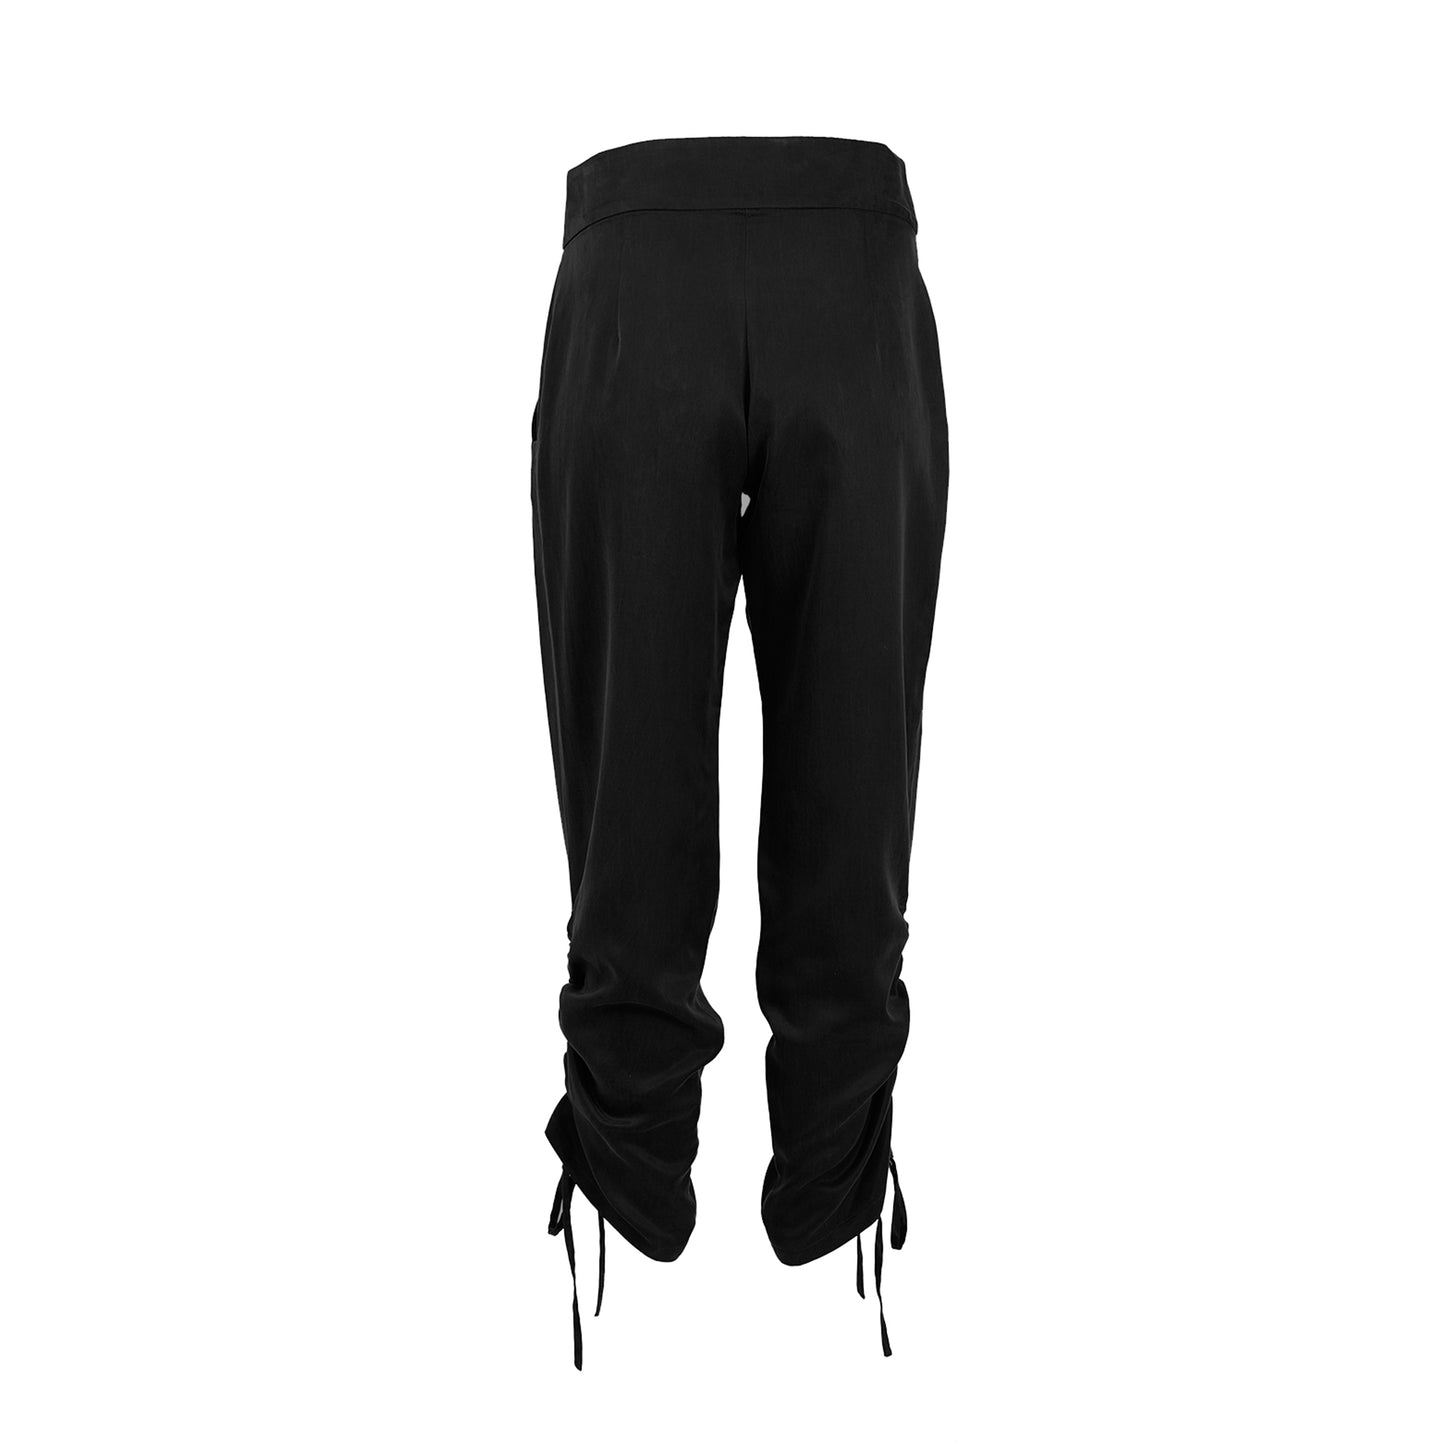 Back of pants with contoured waist band and side drawstring detail in Black